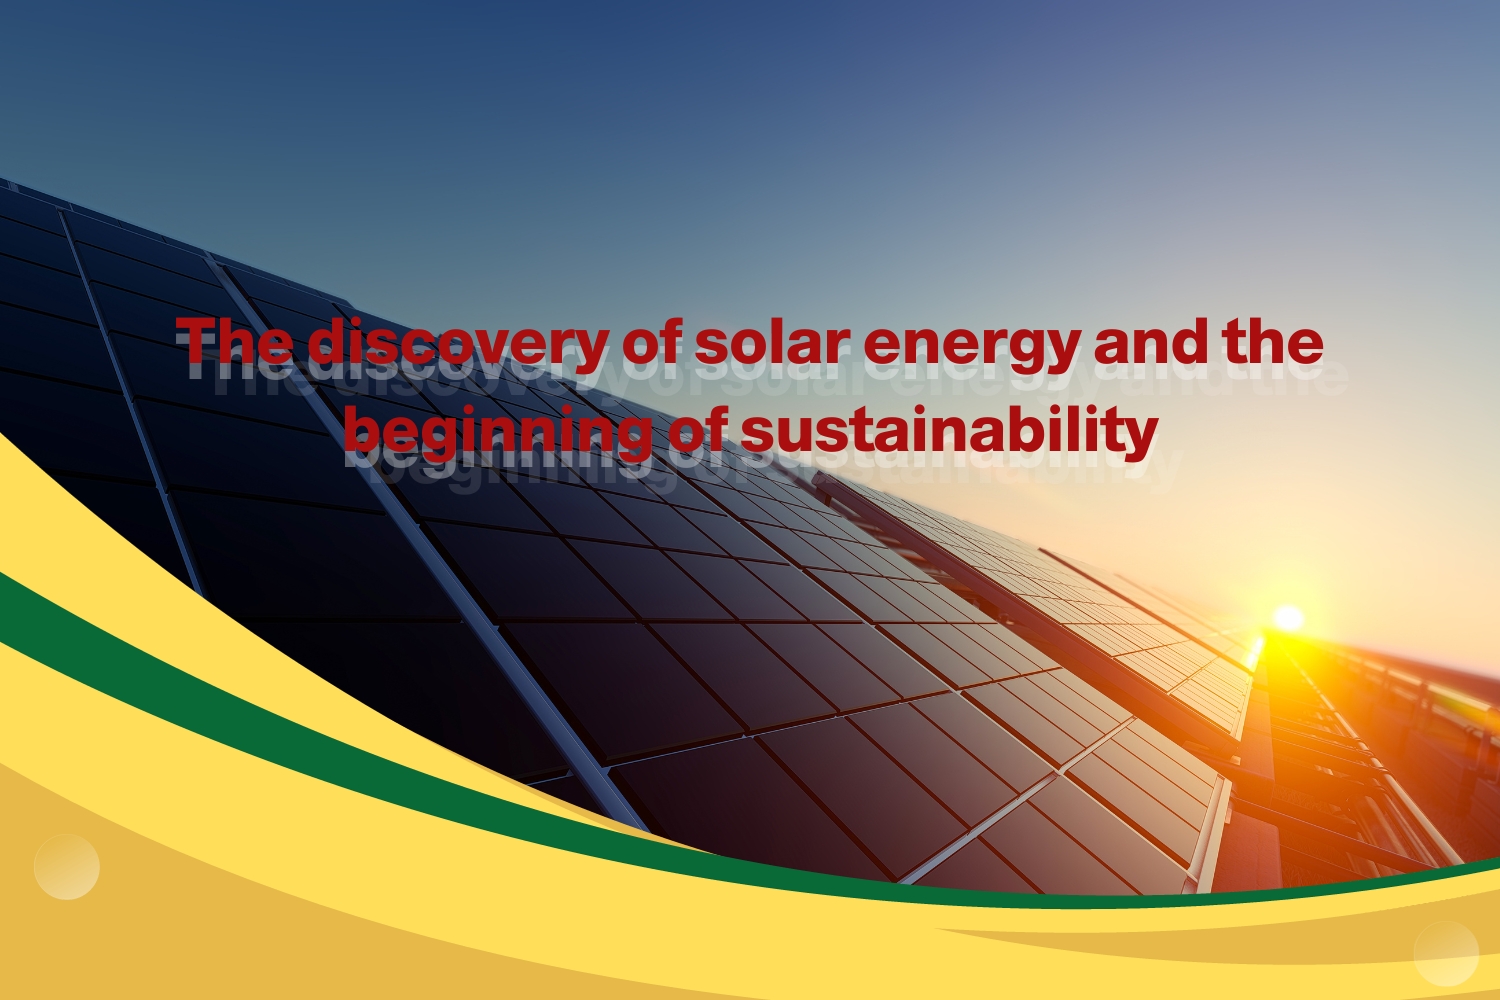 The discovery of solar energy and the beginning of sustainability